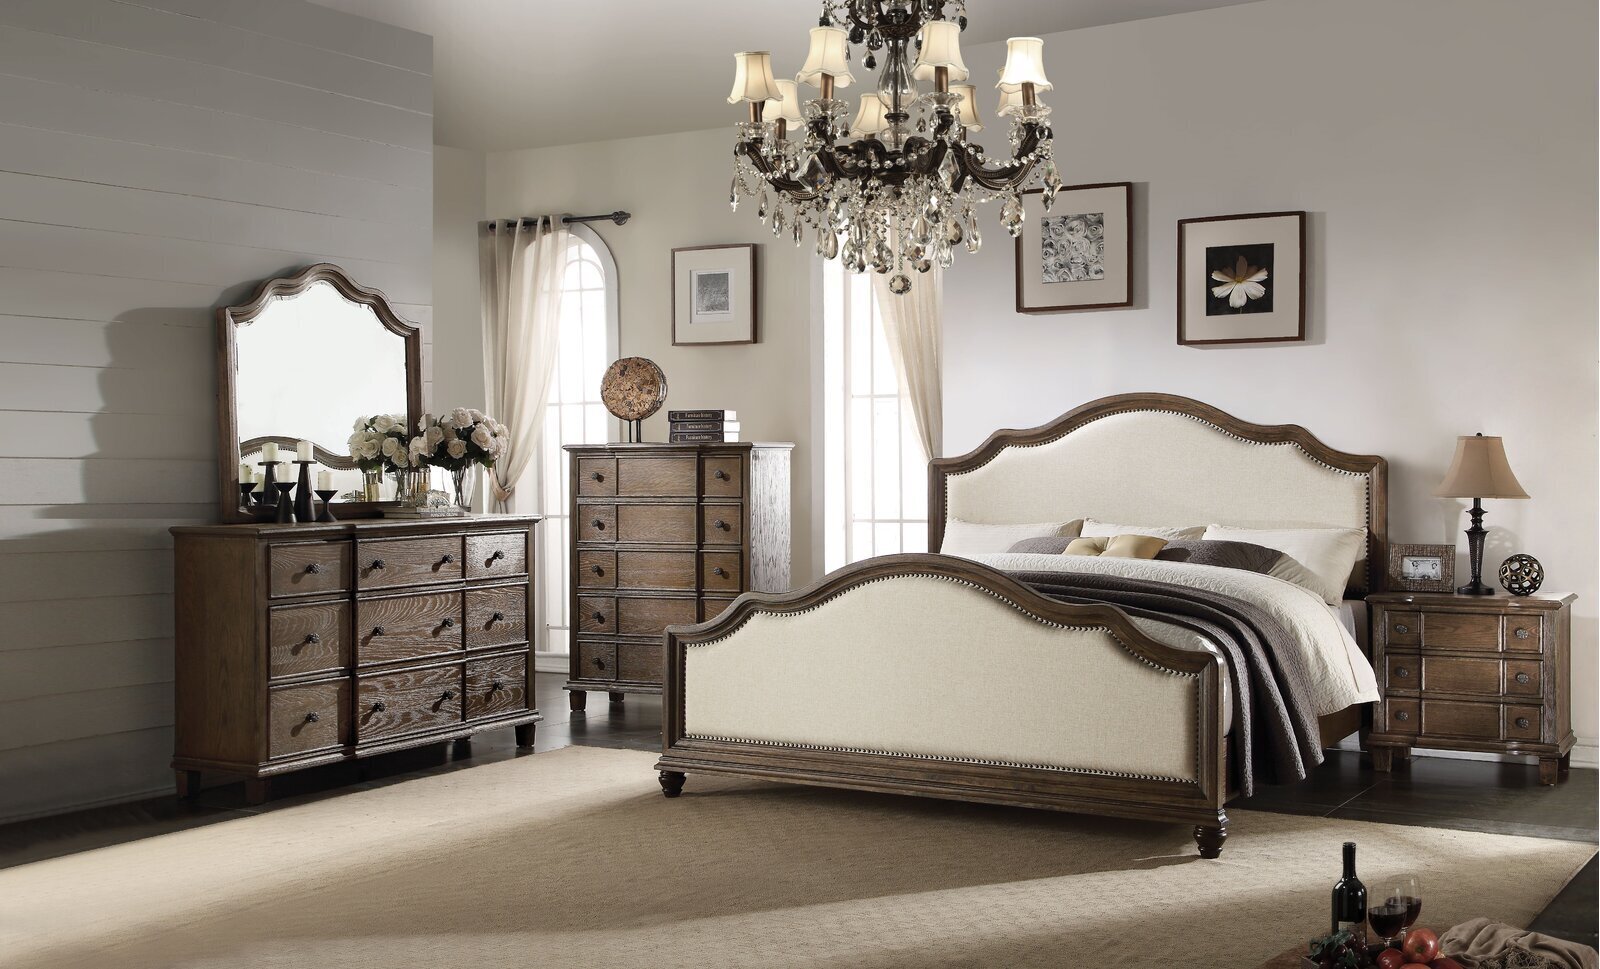 Dark toned bedroom set with French country charm